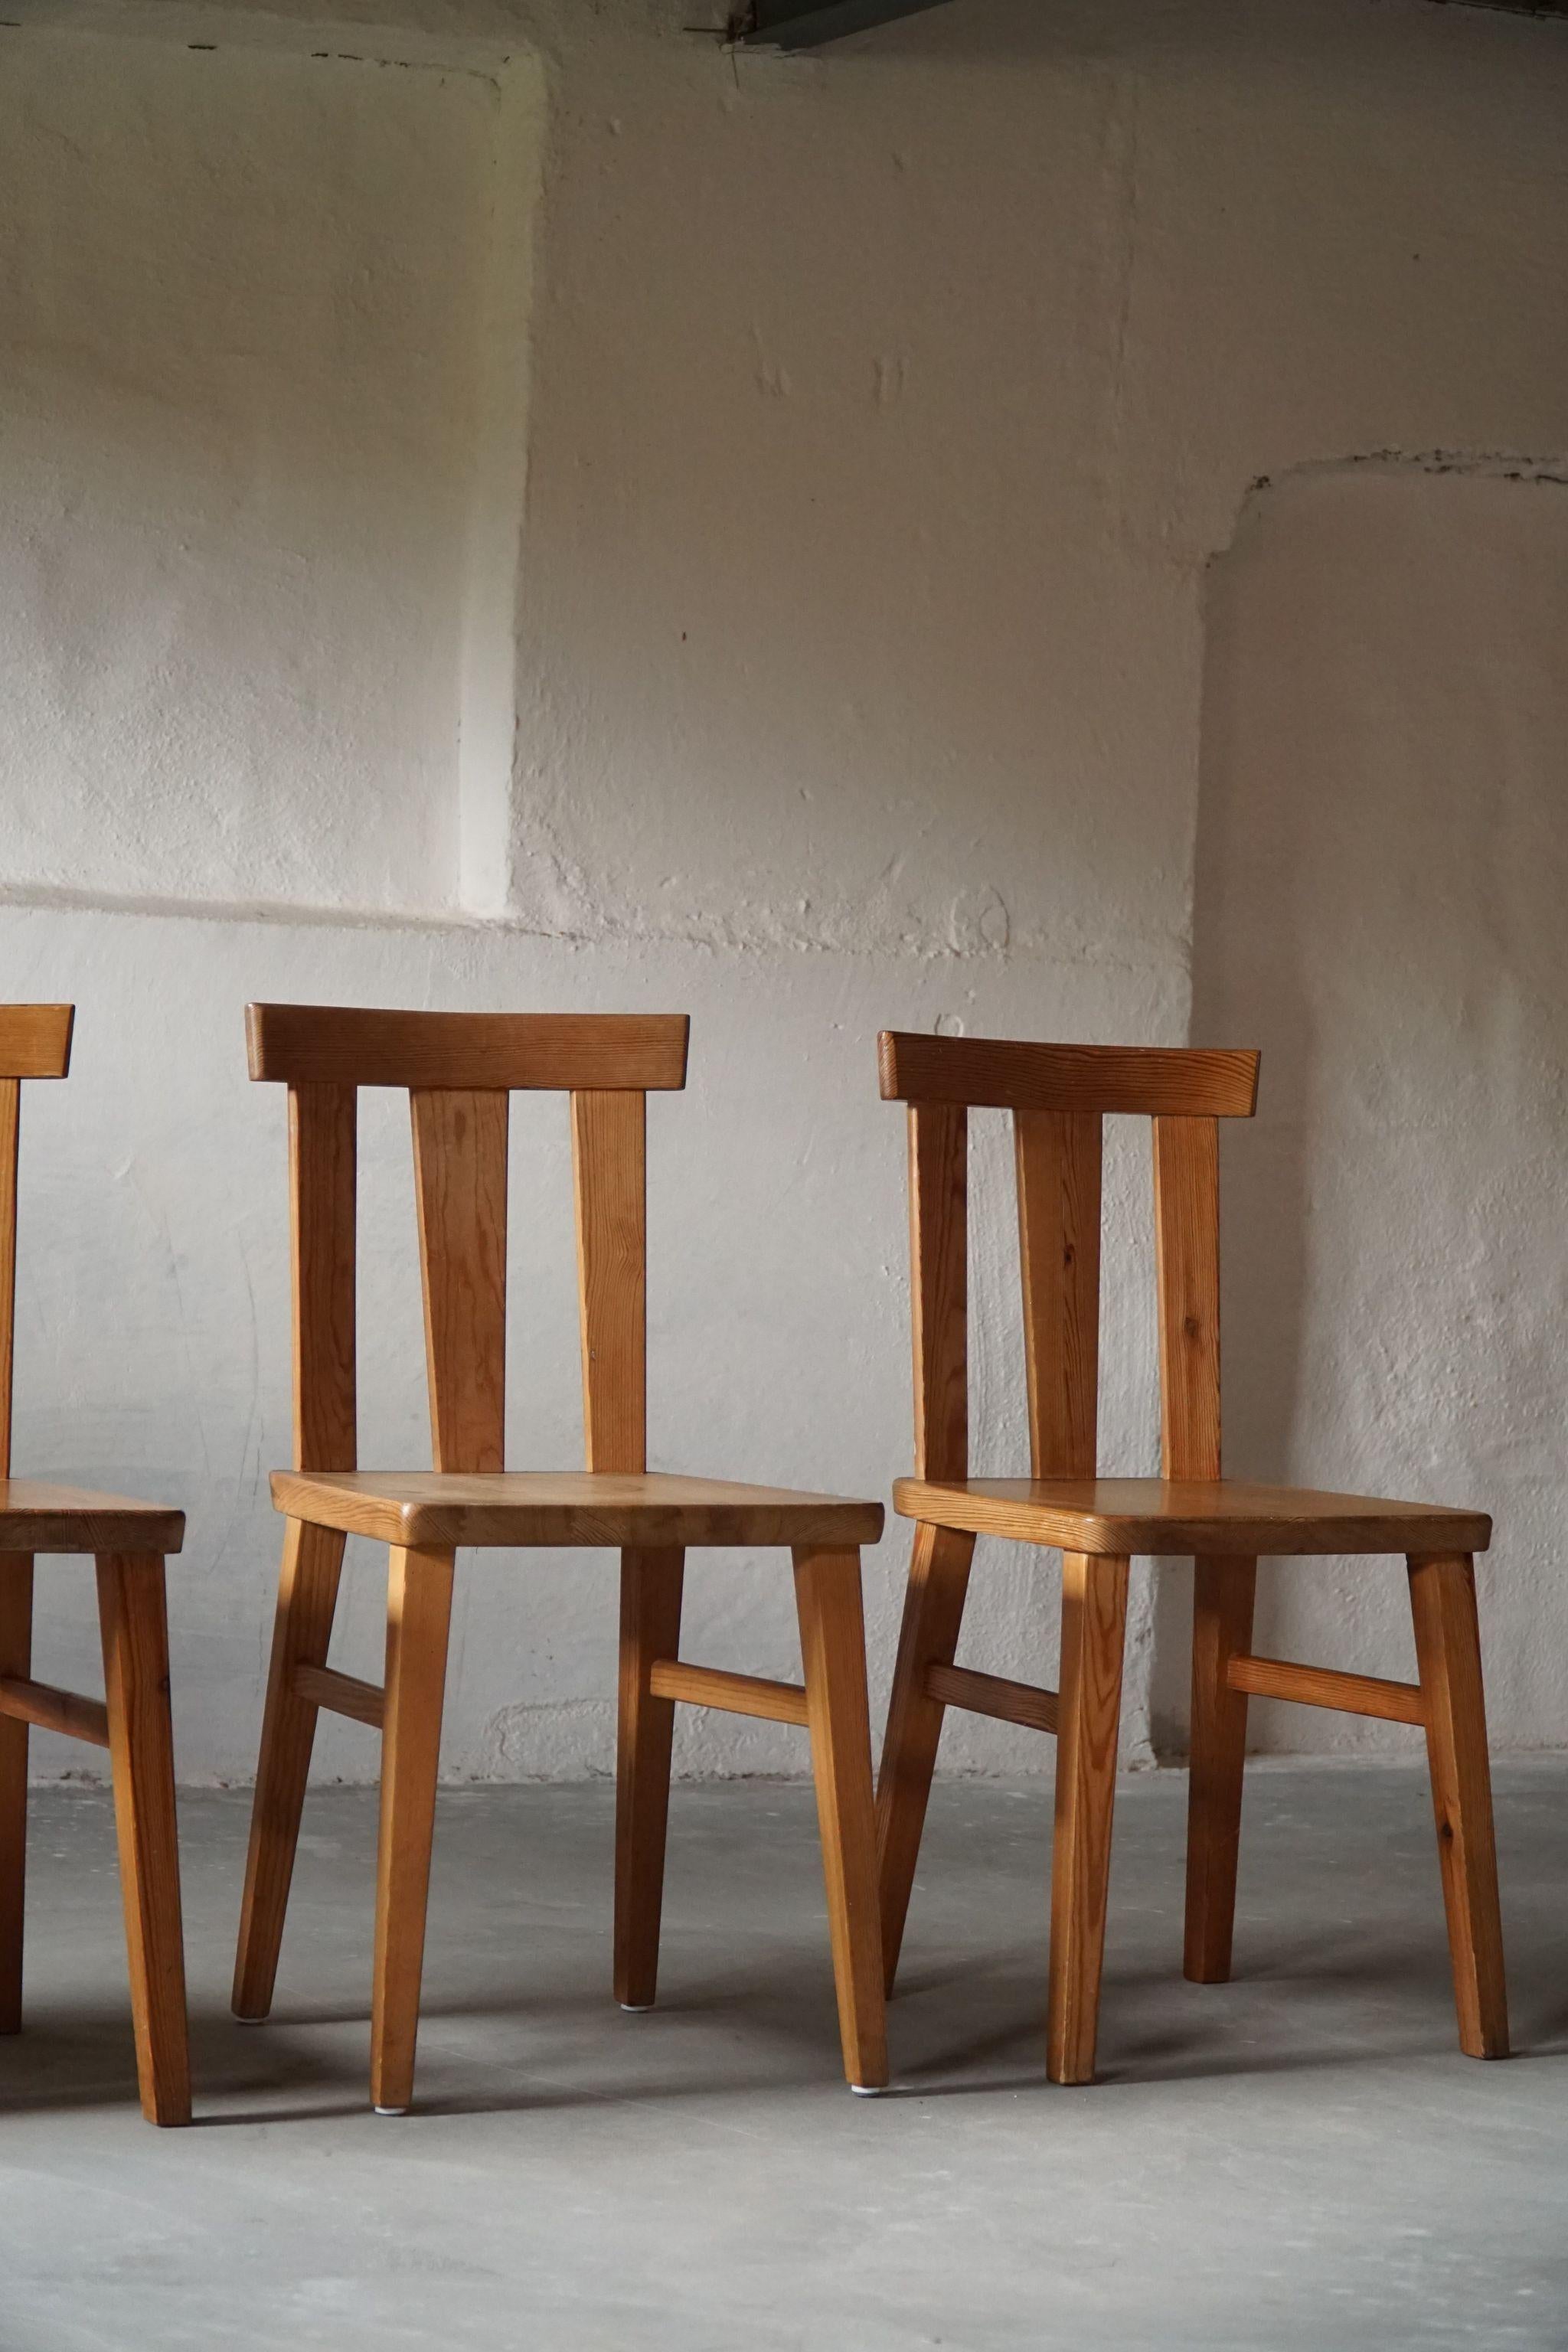 Set of 4 Swedish Modern Chairs in Solid Pine, Axel Einar Hjorth Style, 1930s 10